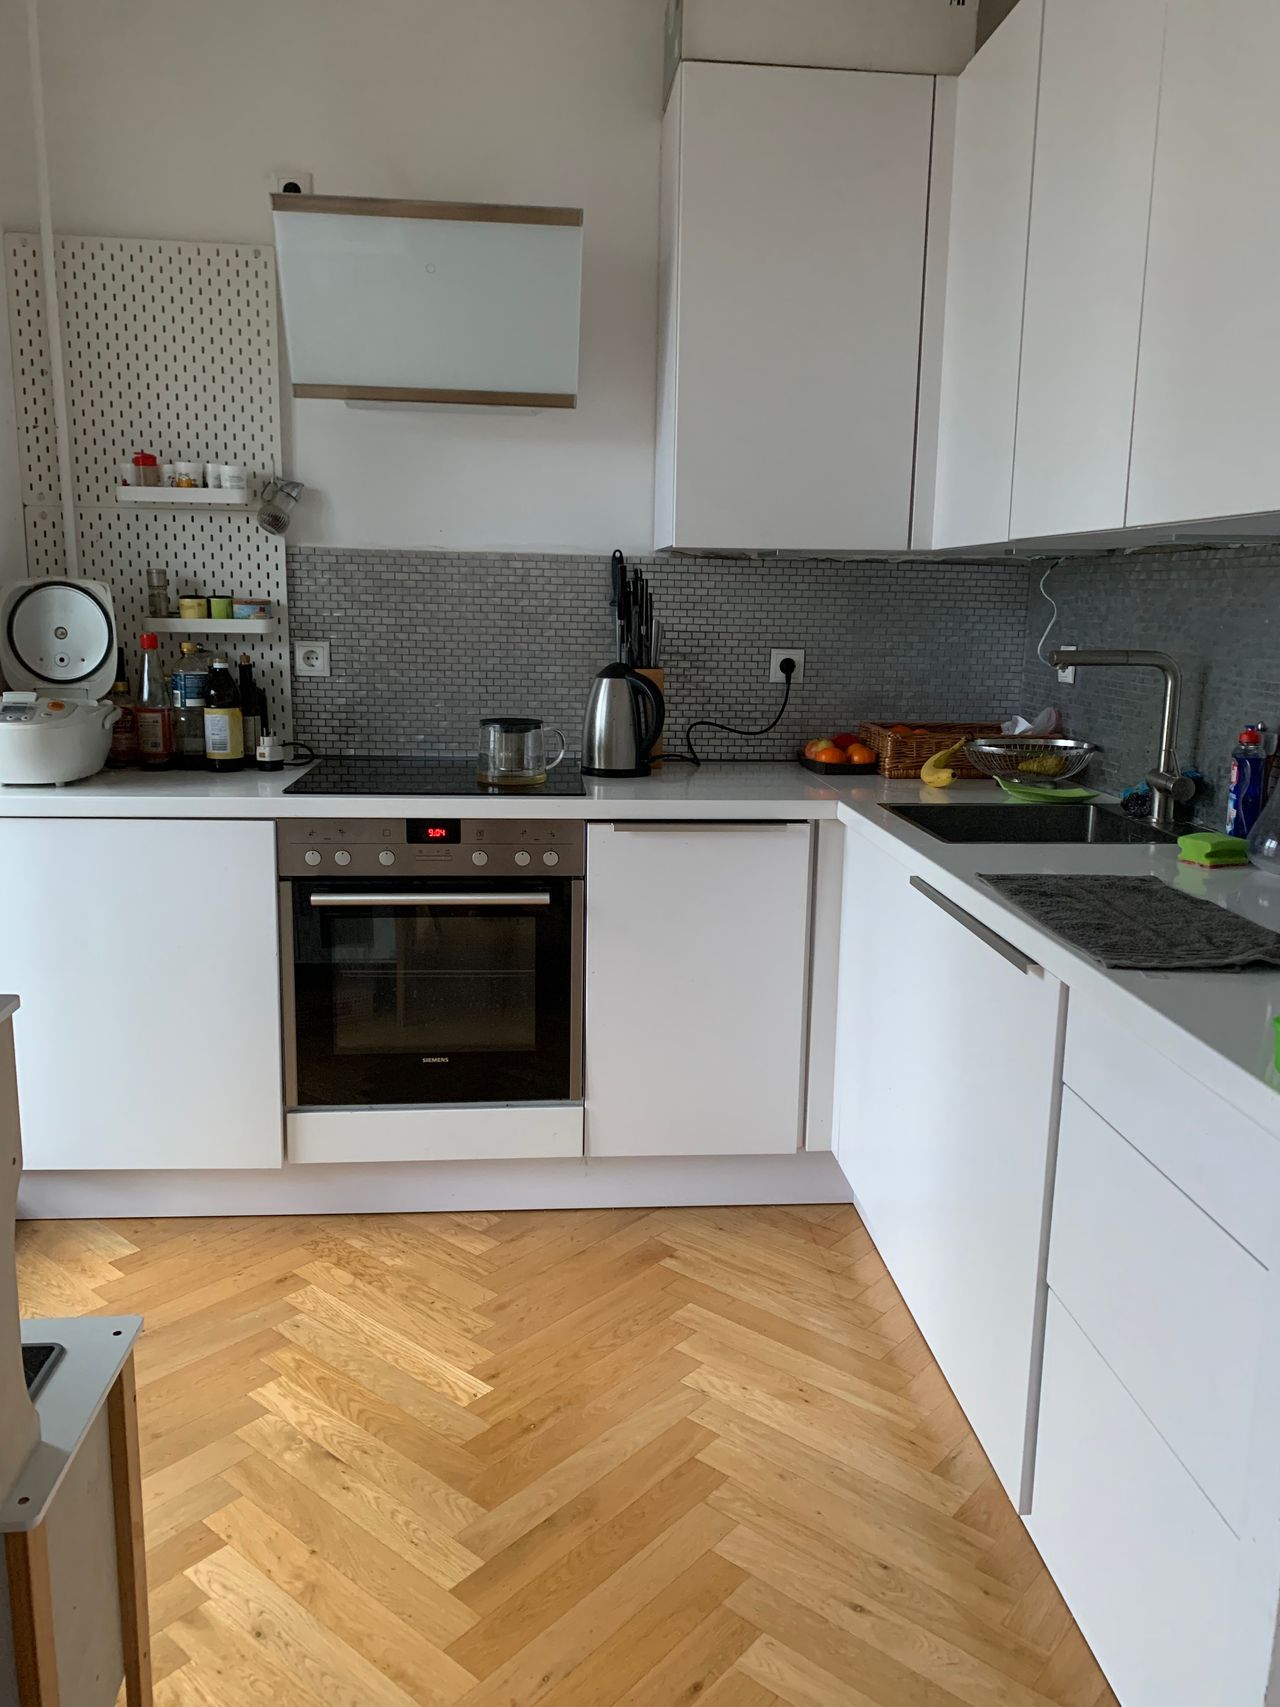 4 rooms 2 baths modern flat with balcony between Checkpoint Charlie and Gendarmenmarkt